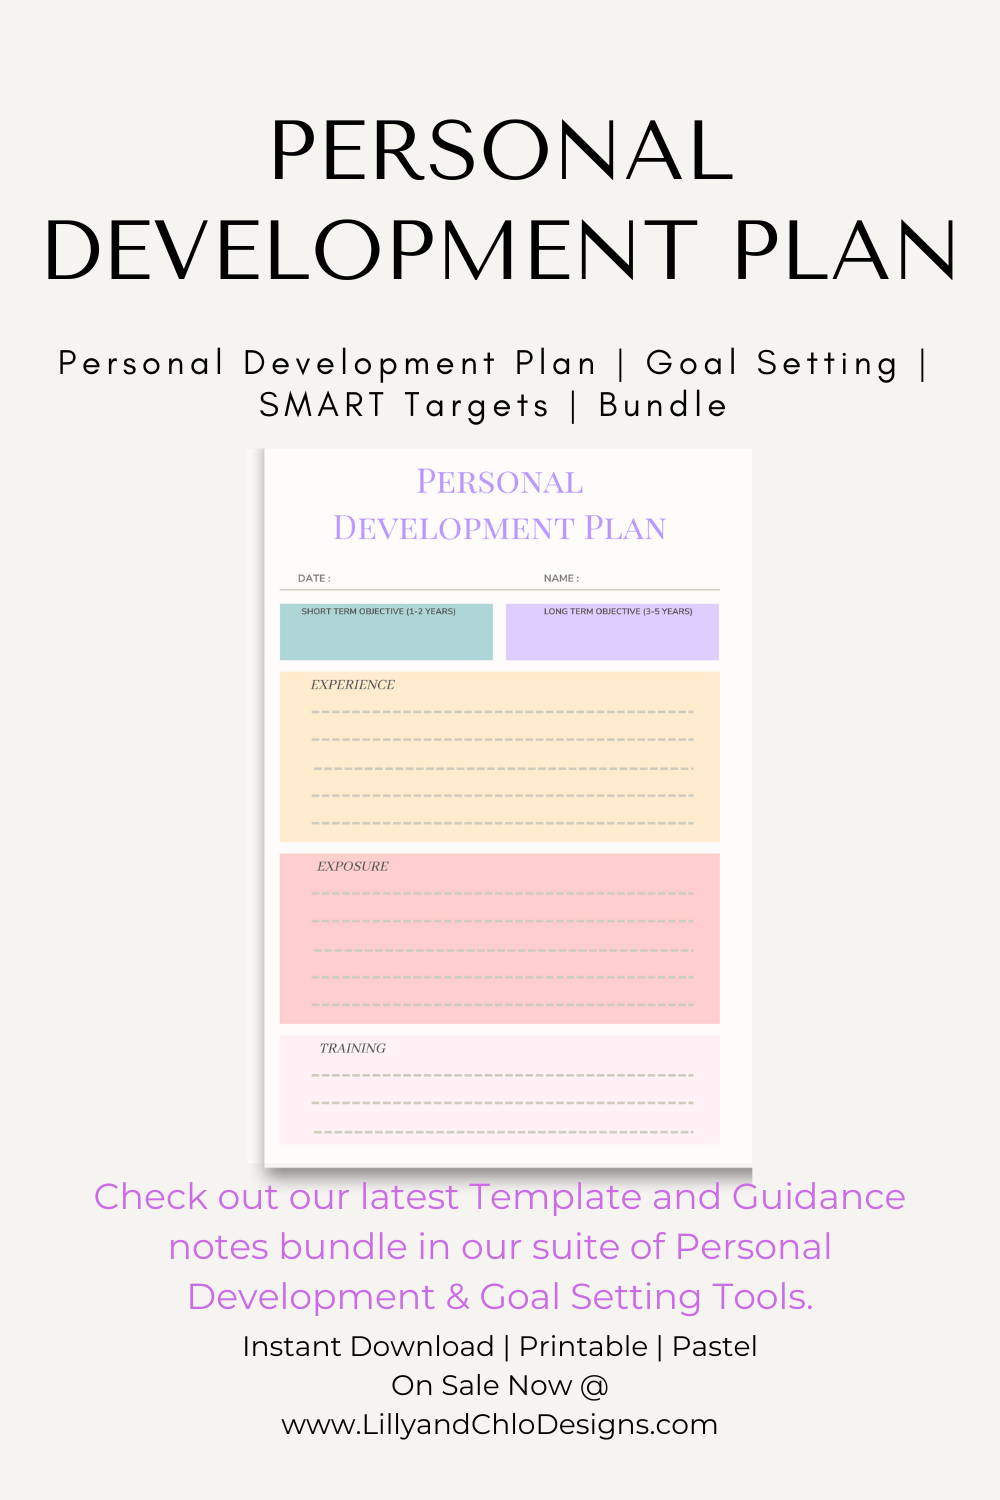 Personal Development Plan - Goal Setting, Personal Development, SMART Targets, Bundle. Image shows a screenshot of the personal development plan template. Instant Download, Printable, Pastel, On sale now at www.lillyandchlodesigns.com